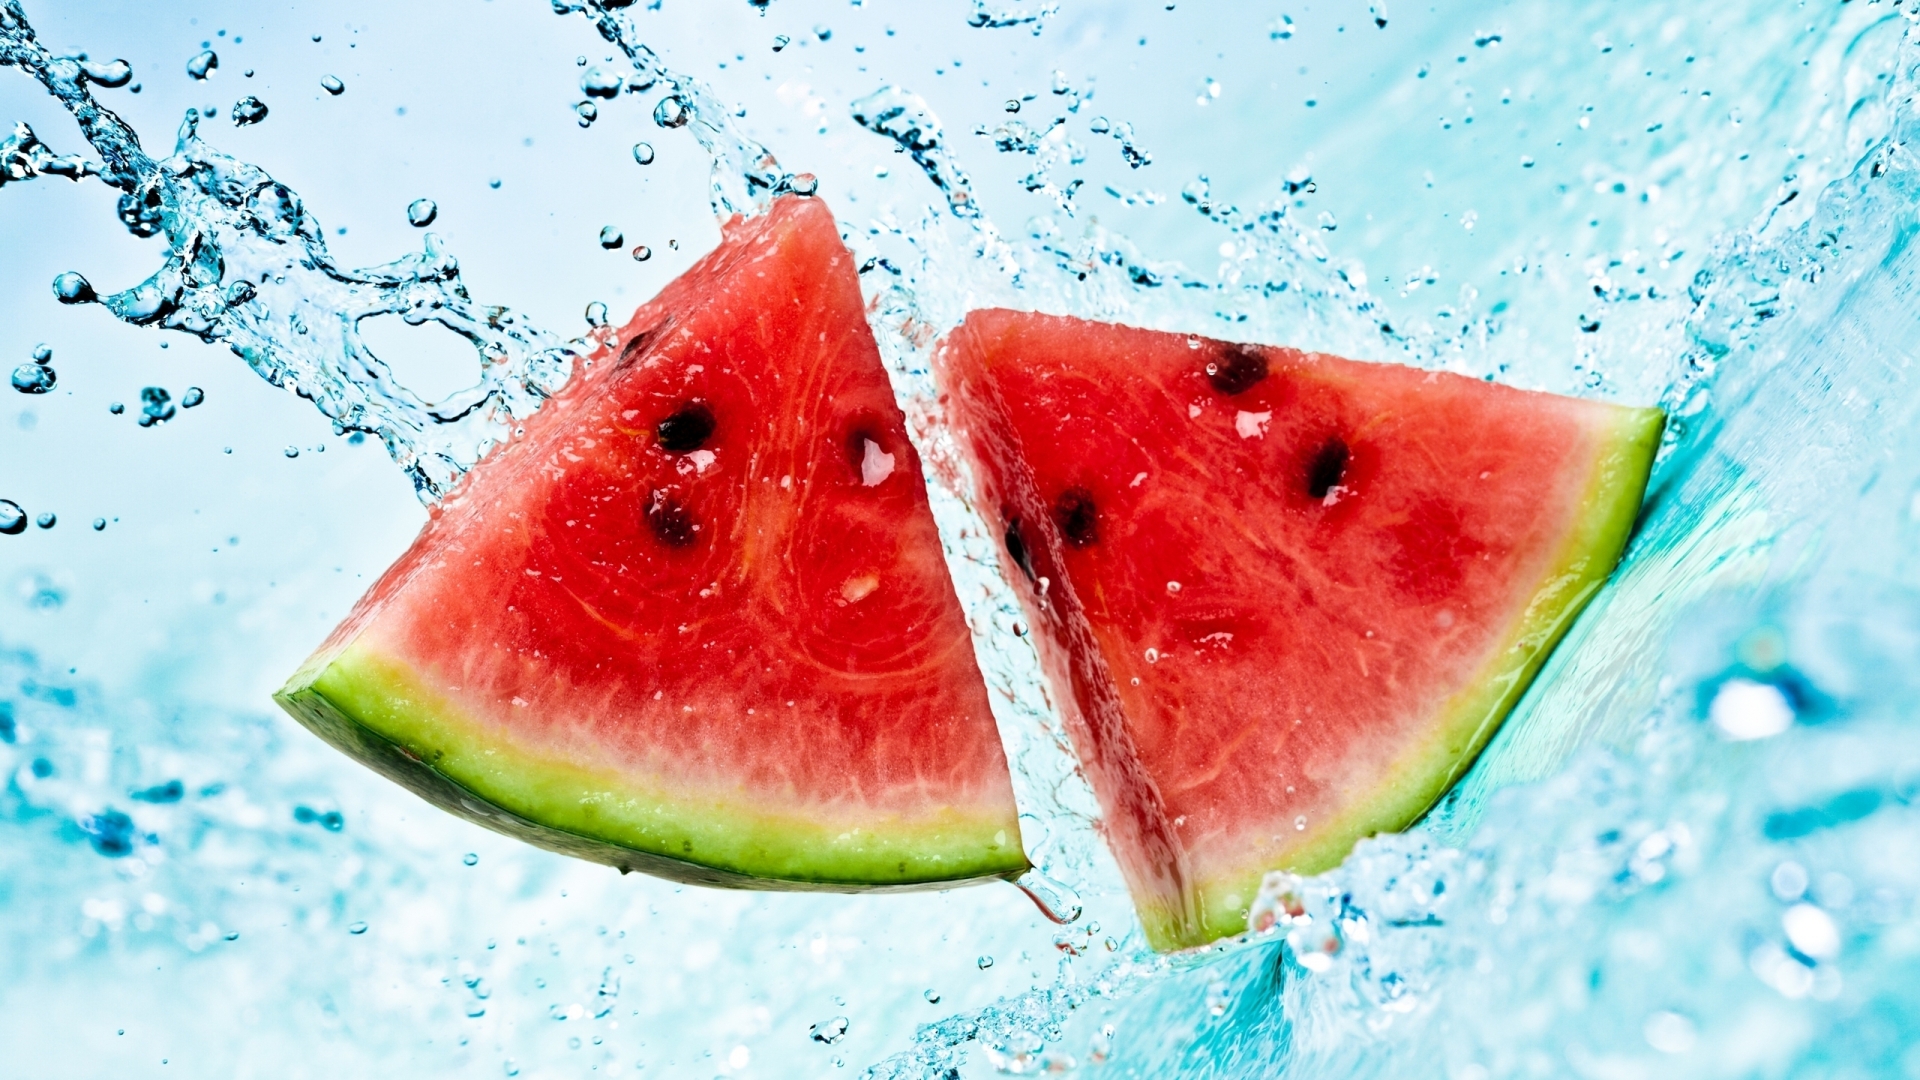 Watermelon Slices for 1920 x 1080 HDTV 1080p resolution